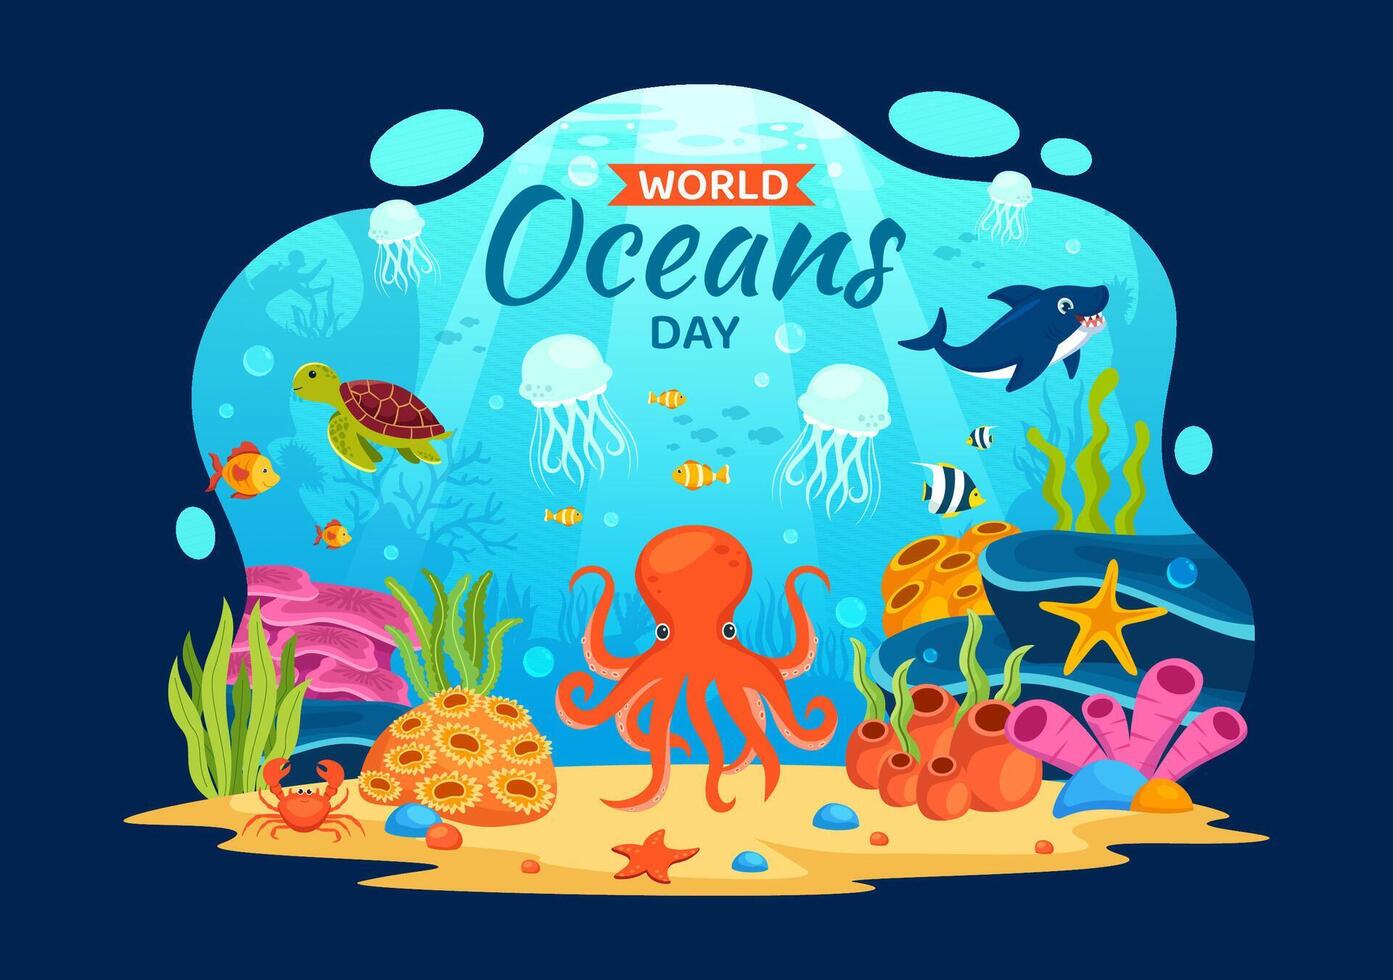 World Oceans Day Vector Illustration to Help Protect and Conserve Ocean, Fish, Ecosystem or Sea Plants in Flat Cartoon Background Design